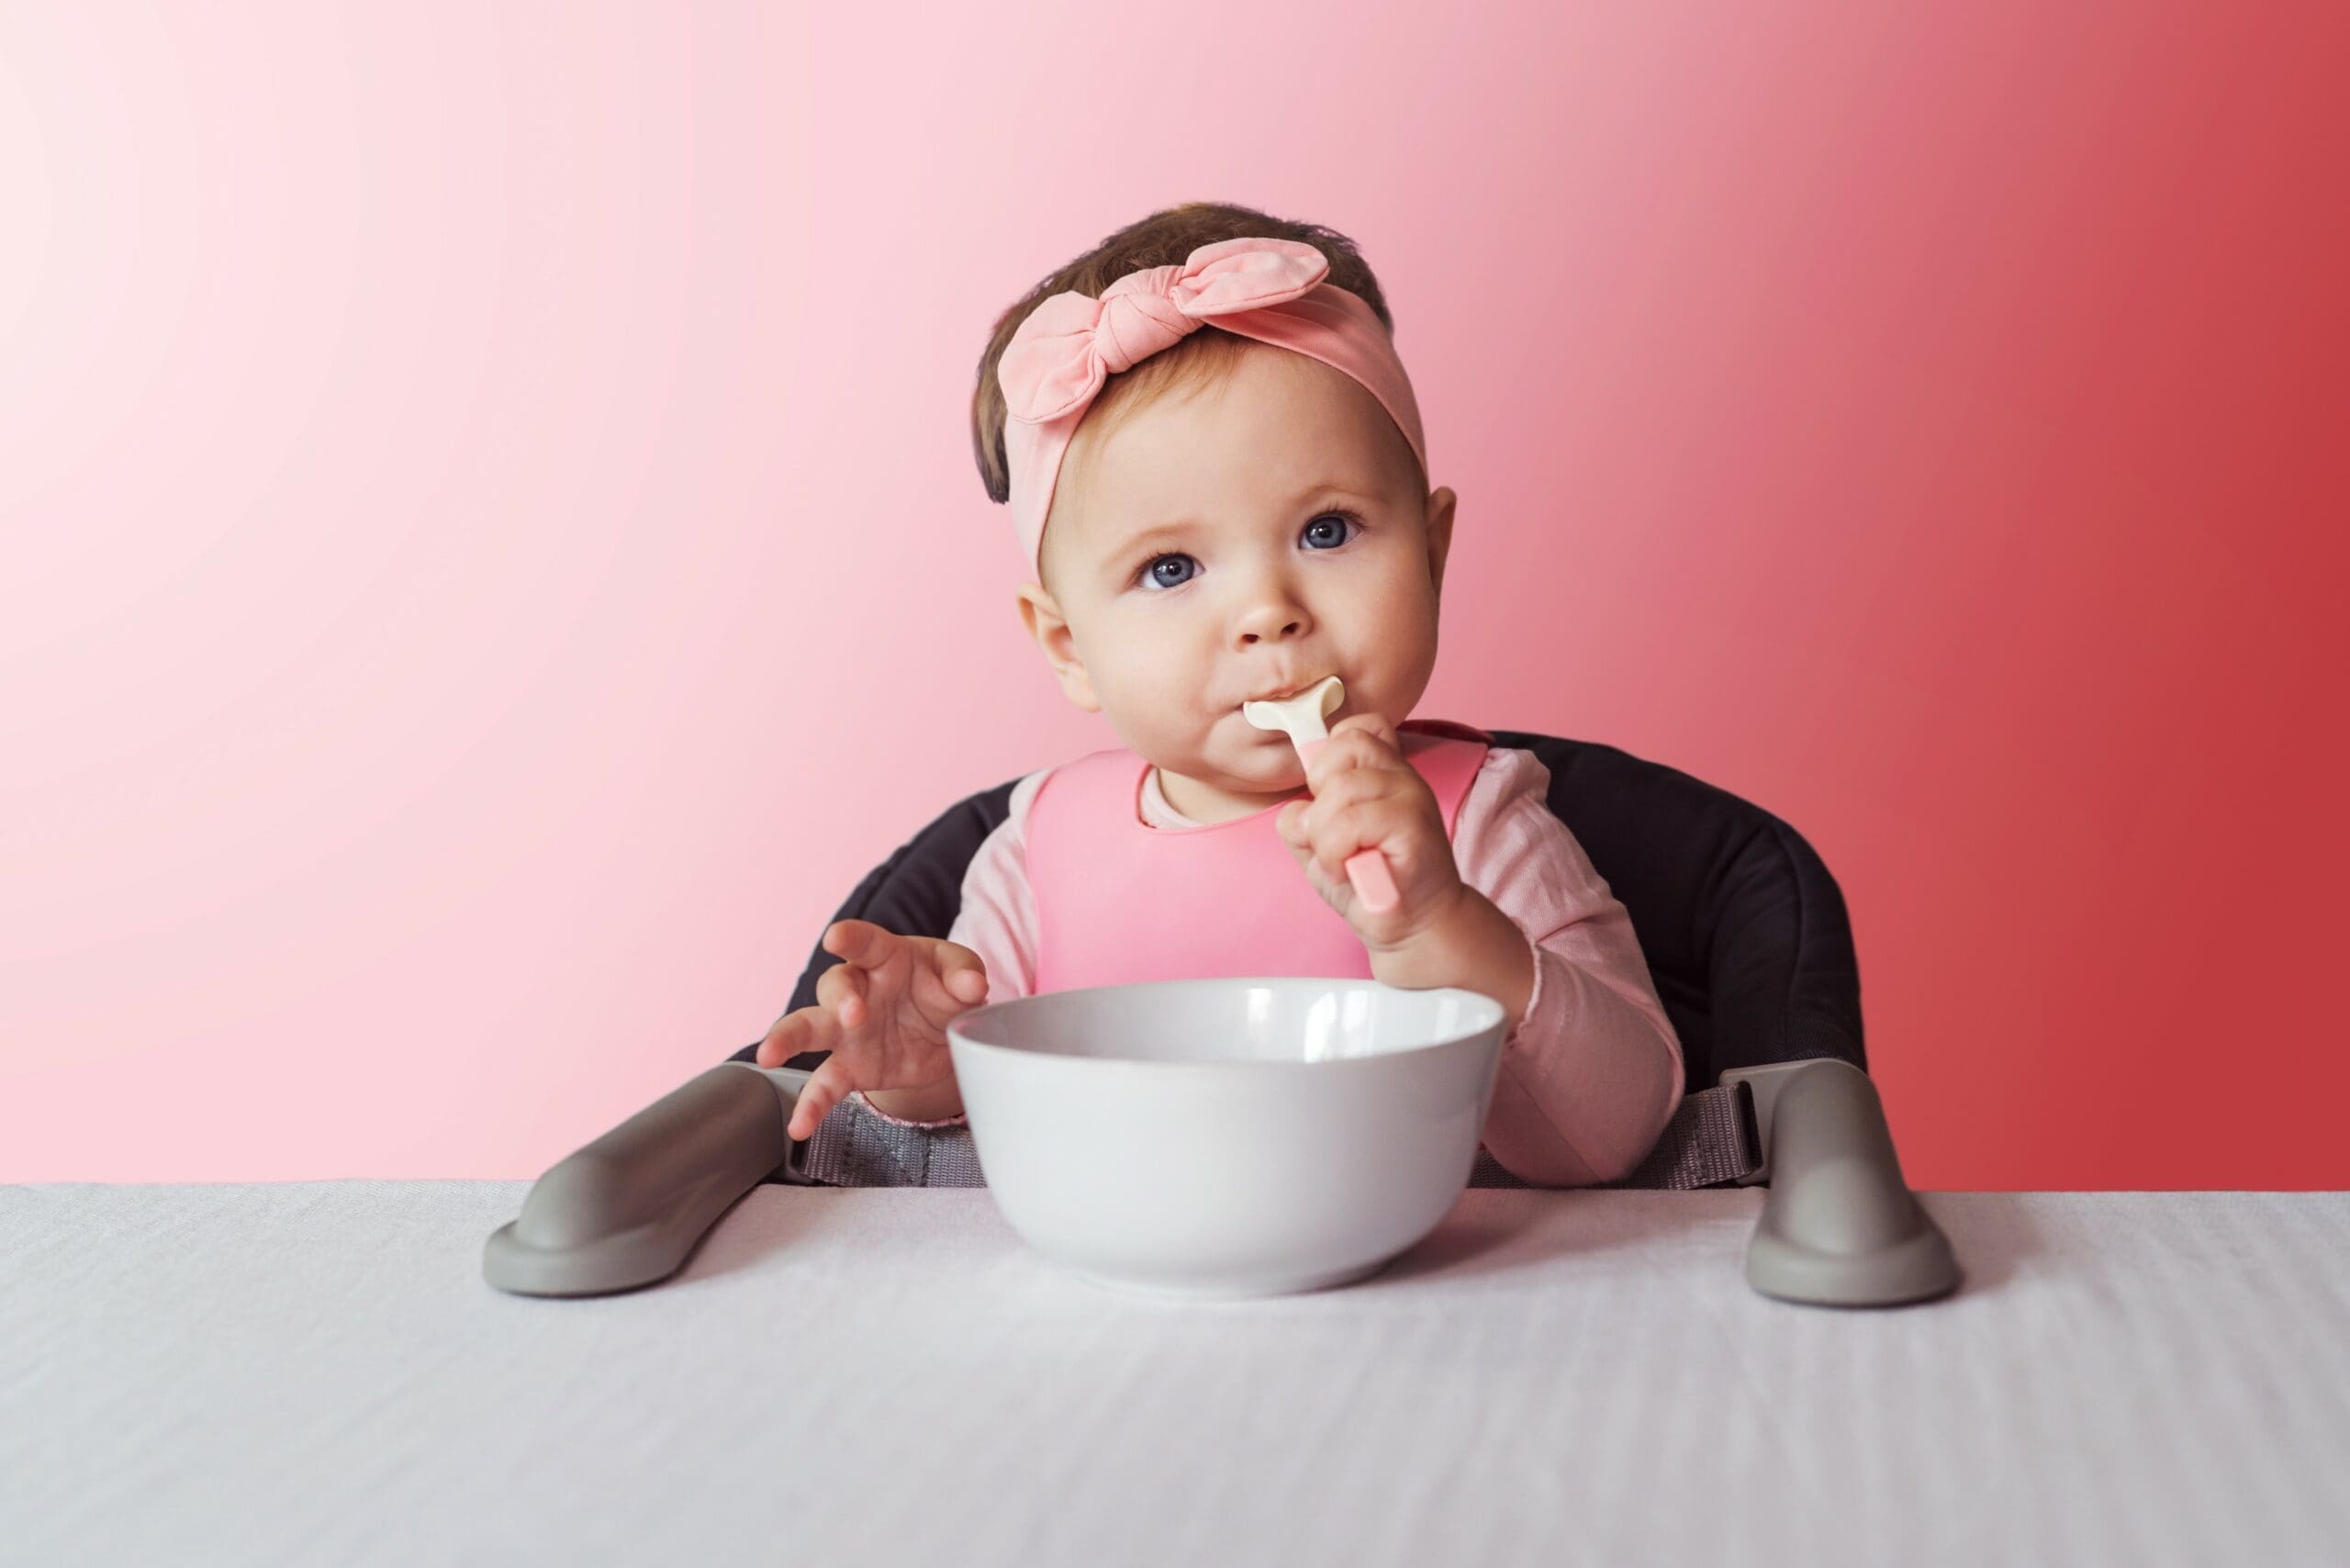 When should you introduce a baby to solids?